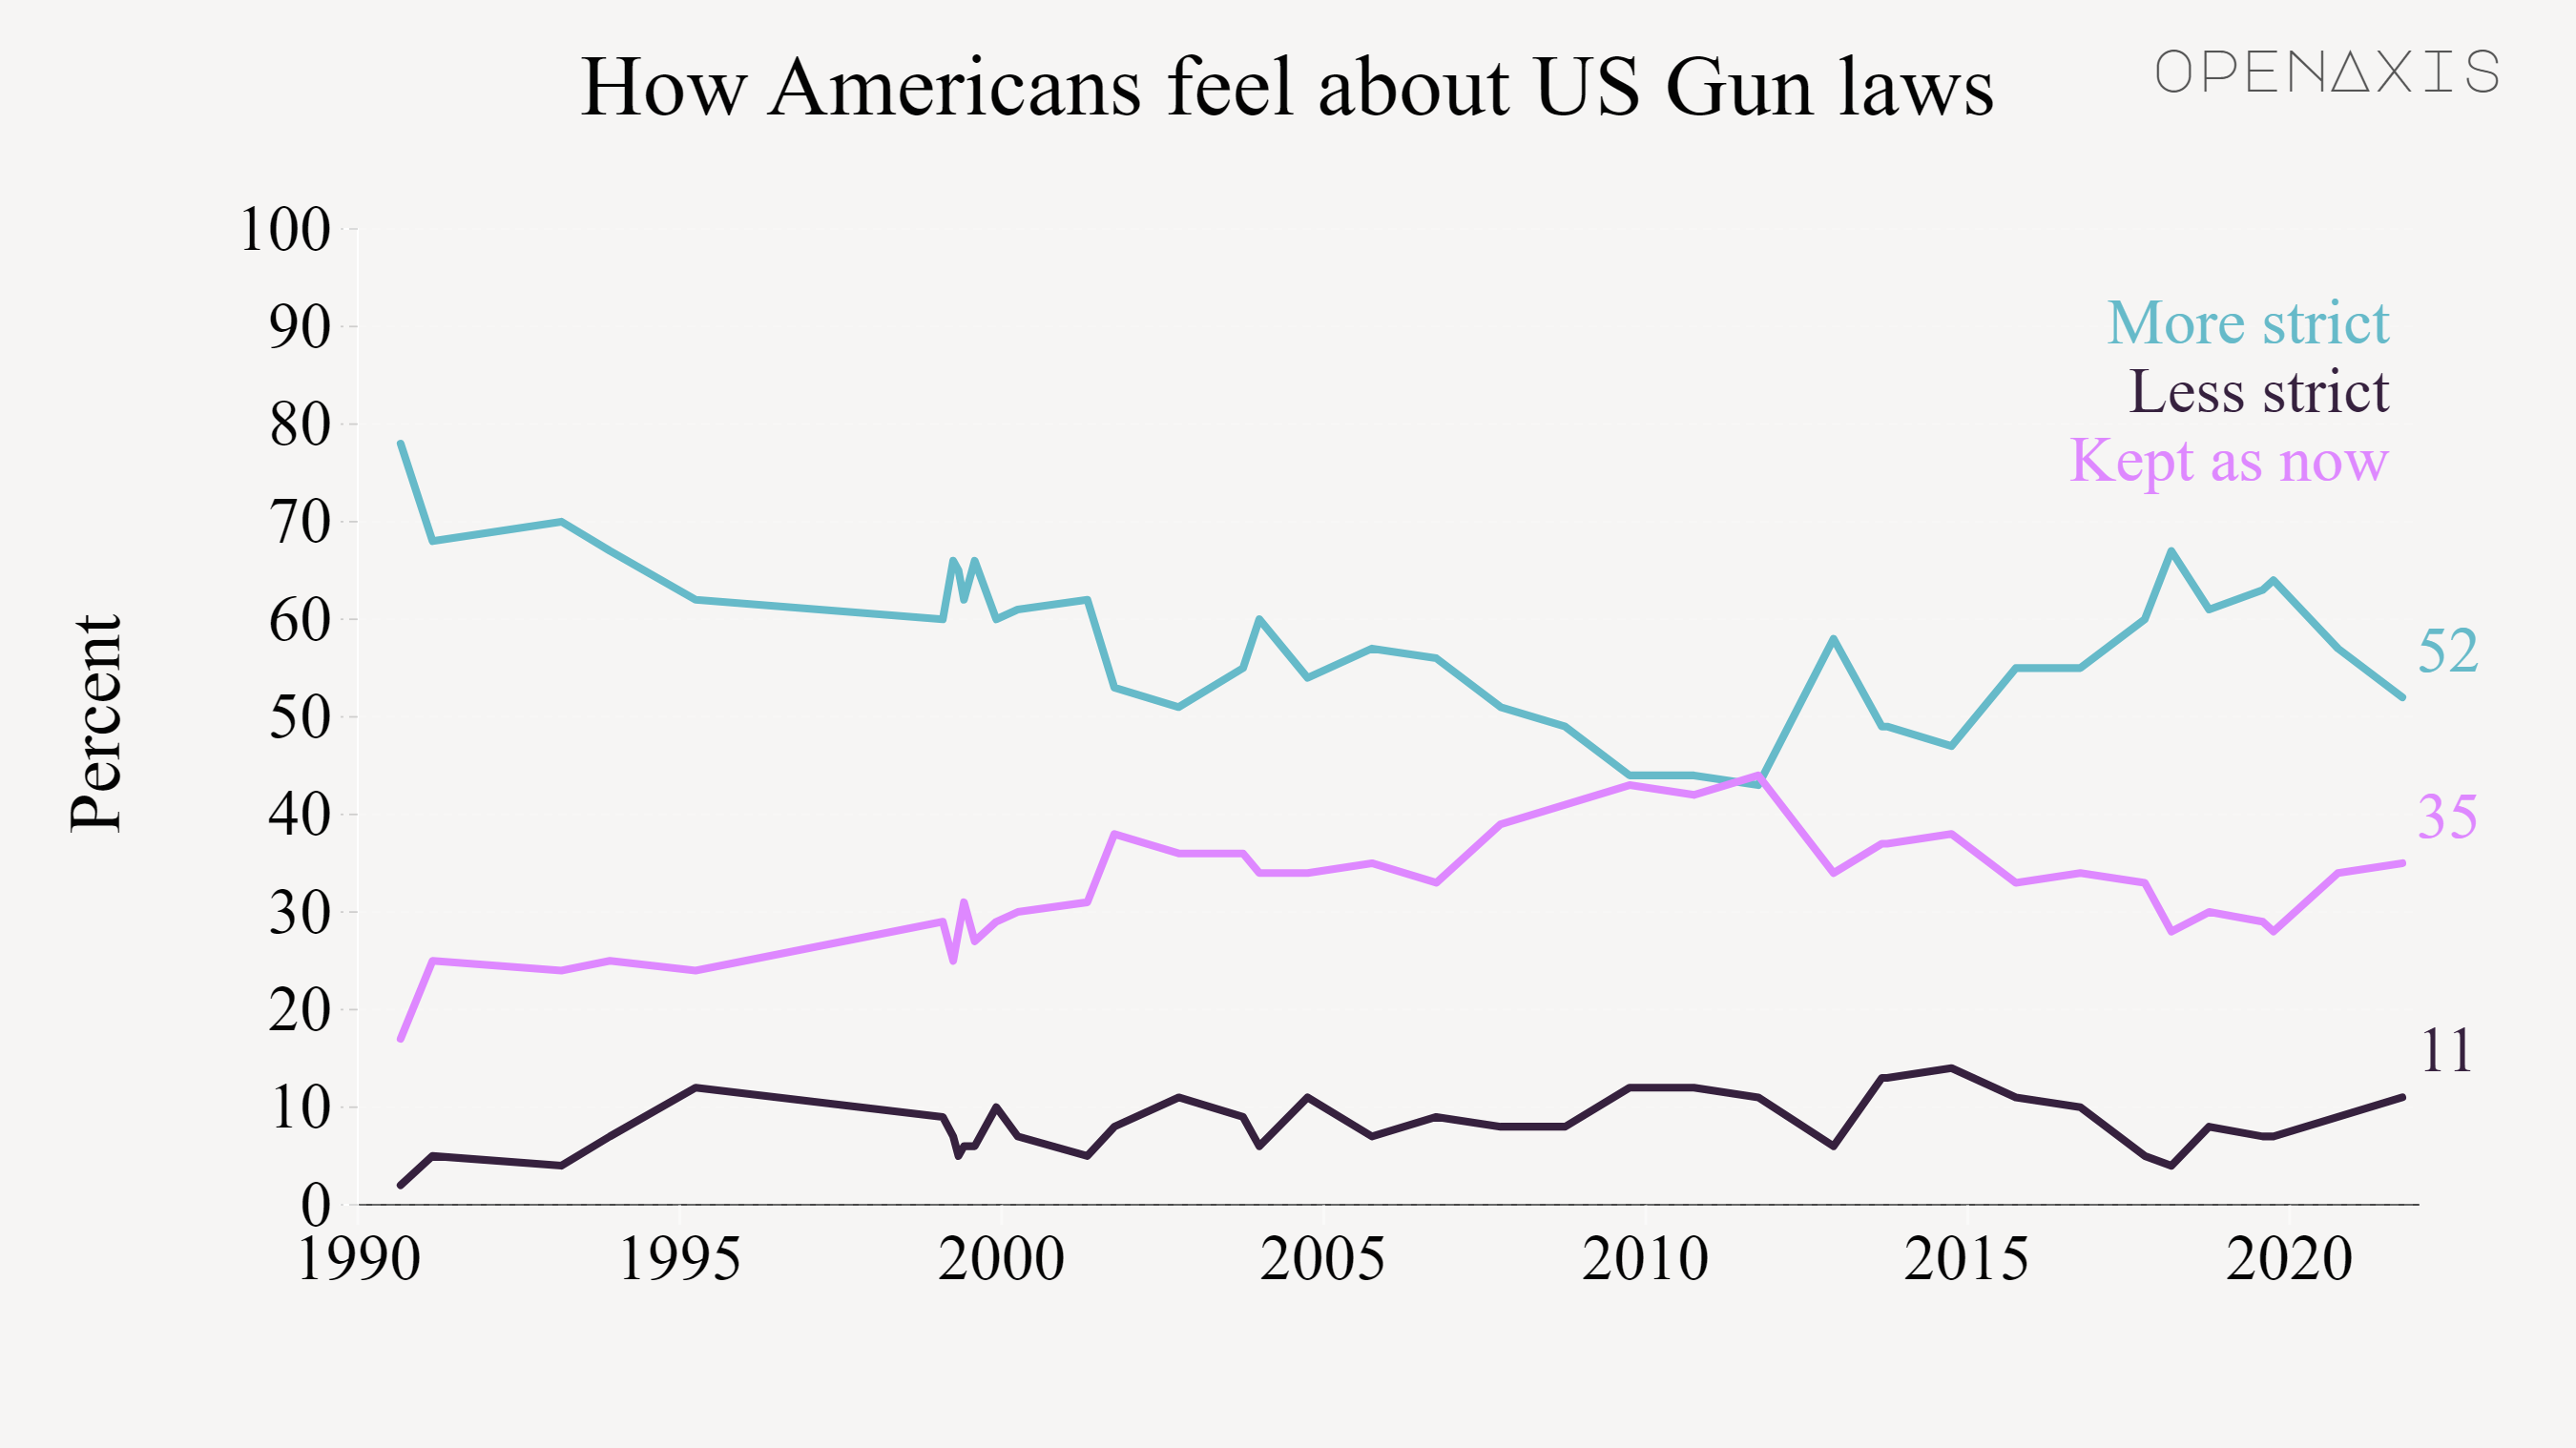 <p>Americans' desire for stricter gun laws remains majority opinion yet has recently fallen to the lowest point since 2014.</p><p><br /></p><p>The prompt is: <strong>In general, do you feel that the laws covering the sale of fire arms should be made more strict, less strict or kept as they are now?</strong></p><p><br /></p><p><span data-index="0" data-denotation-char data-id="0" data-value="&lt;a href=&quot;/search?q=%23guns&quot; target=_self&gt;#guns" data-link="/search?q=%23guns">﻿<span contenteditable="false"><span></span><a href="/search?q=%23guns" target="_self">#guns</a></span>﻿</span> <span data-index="0" data-denotation-char data-id="0" data-value="&lt;a href=&quot;/search?q=%23gunviolence&quot; target=_self&gt;#gunviolence" data-link="/search?q=%23gunviolence">﻿<span contenteditable="false"><span></span><a href="/search?q=%23gunviolence" target="_self">#gunviolence</a></span>﻿</span> </p><p><br /></p><p>Source: <a href="/data/3787" target="_blank">Gallup Poll</a></p><p><br /></p>